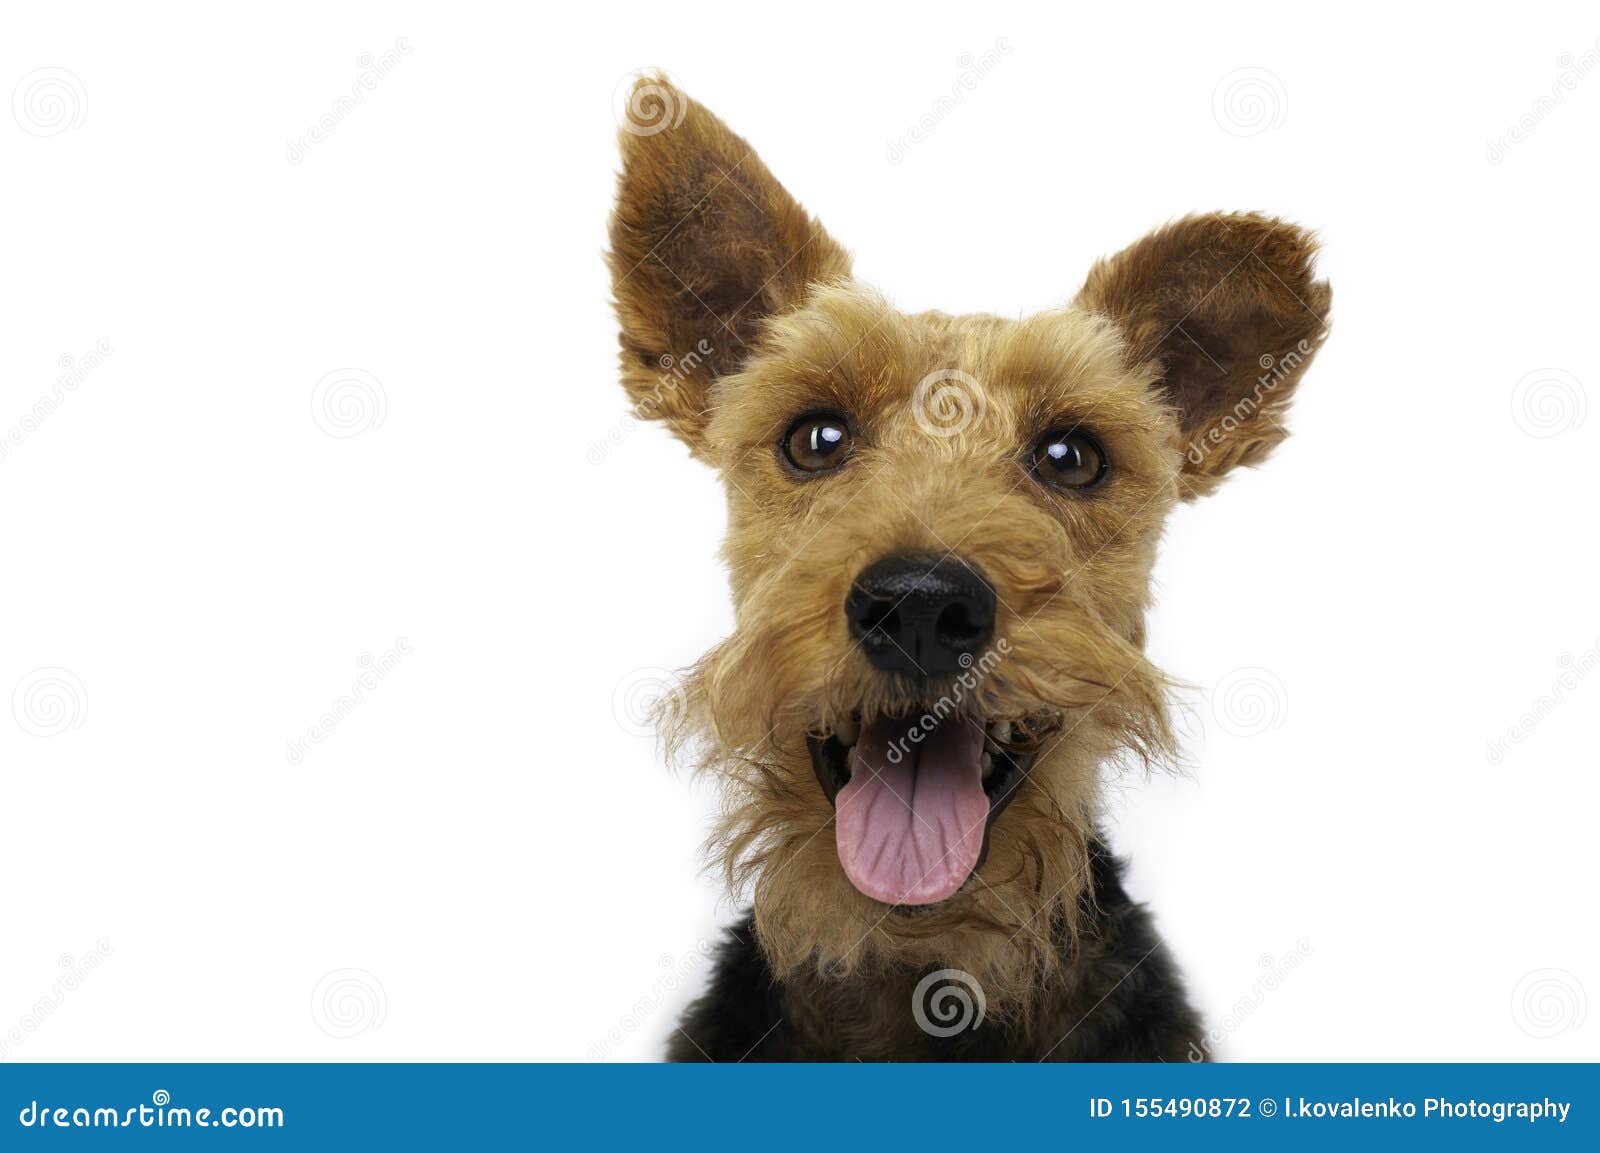 welsh terrier dog is smiling on white background